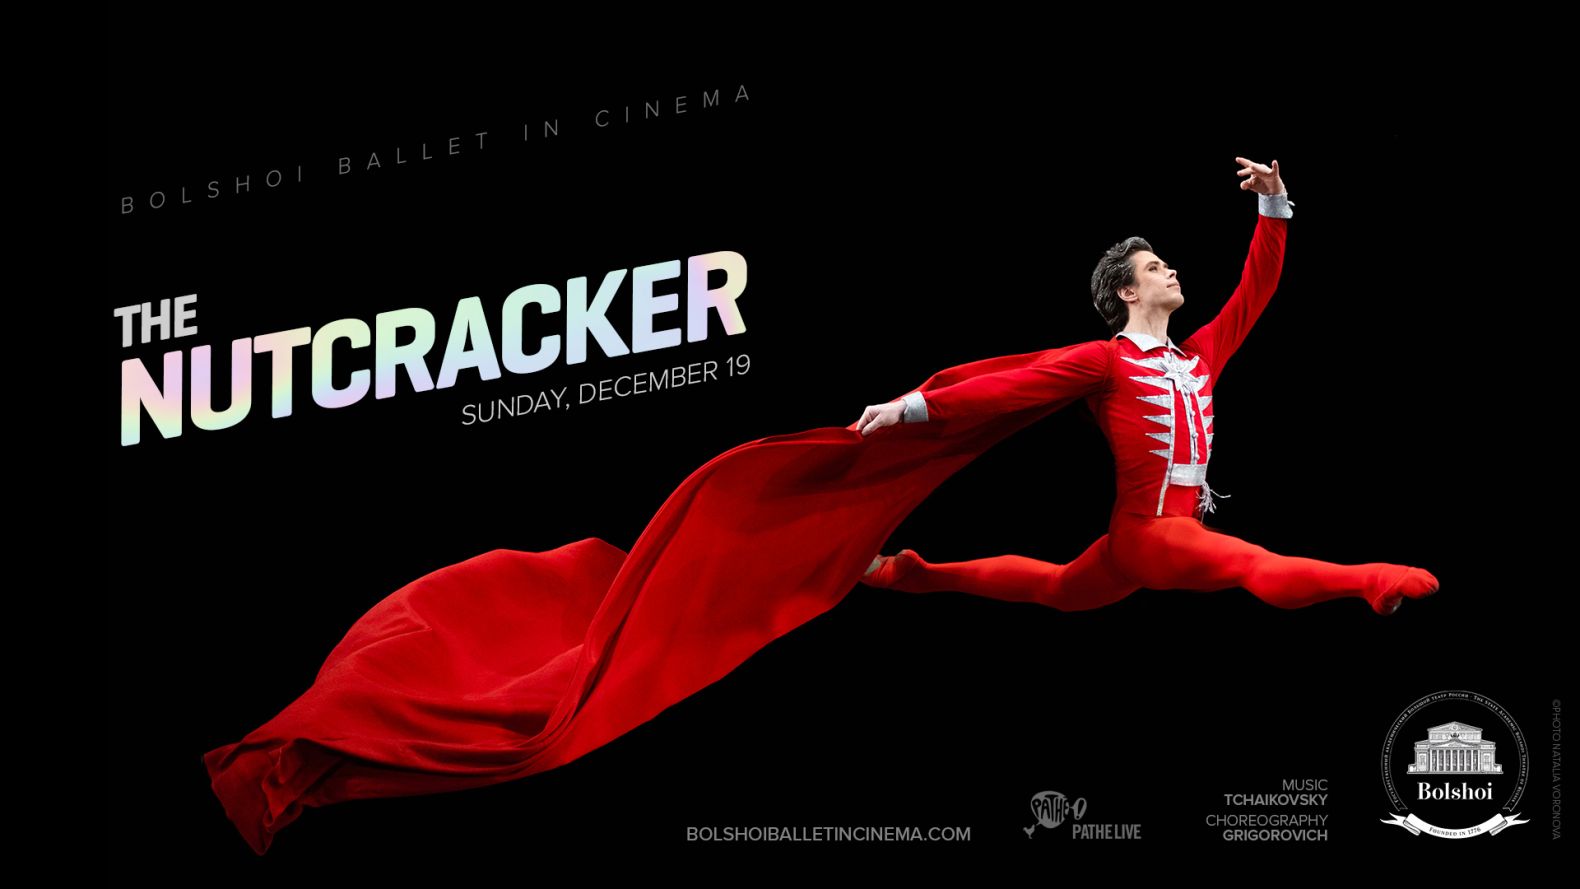 Bolshoi Ballet Promo Image: A ballet dancer in a red leotard, red tights and red billowing cape leaping.